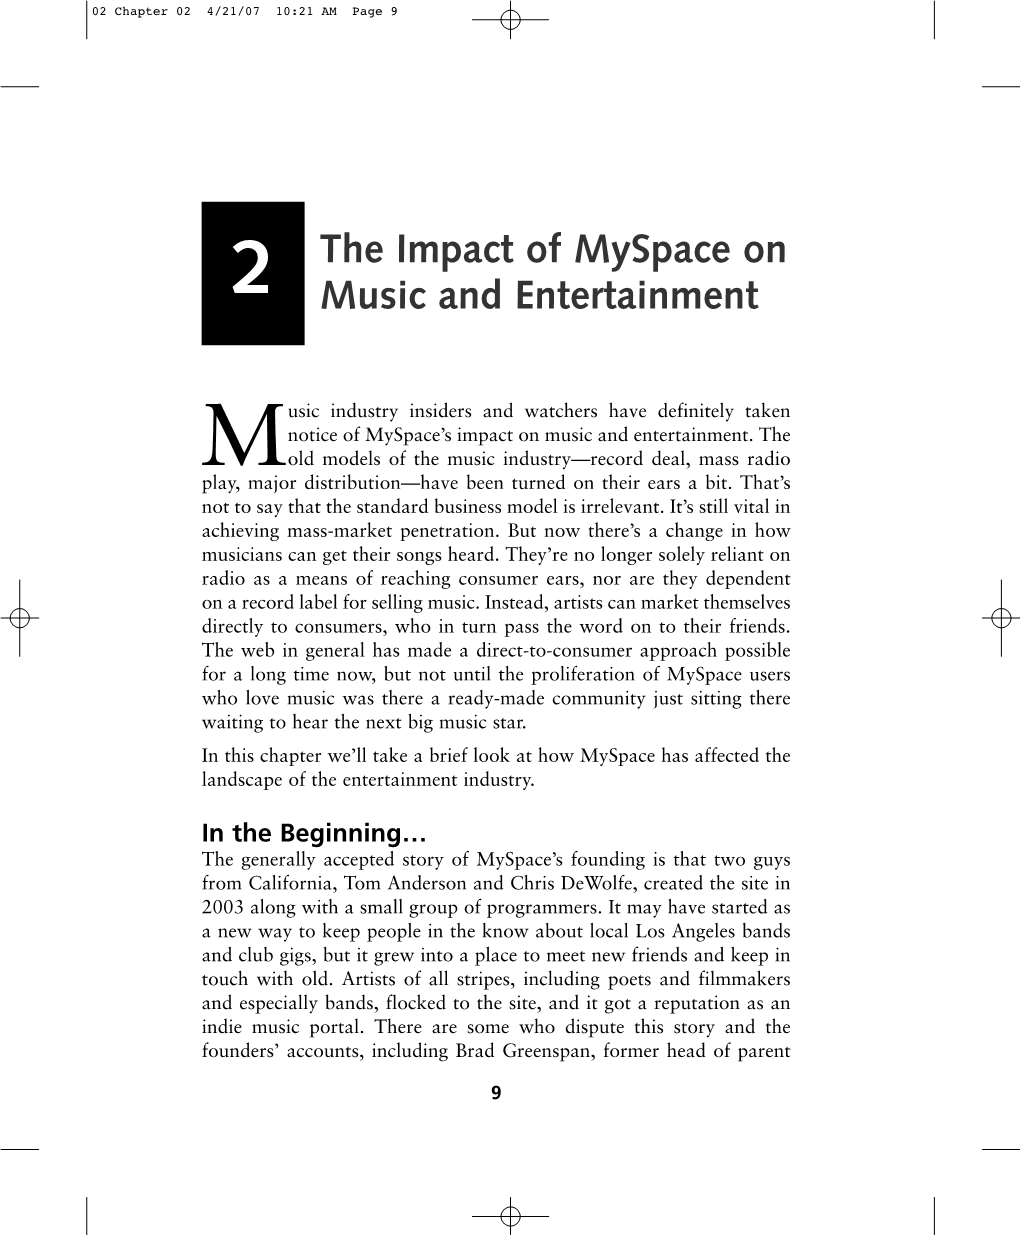 The Impact of Myspace on Music and Entertainment 11